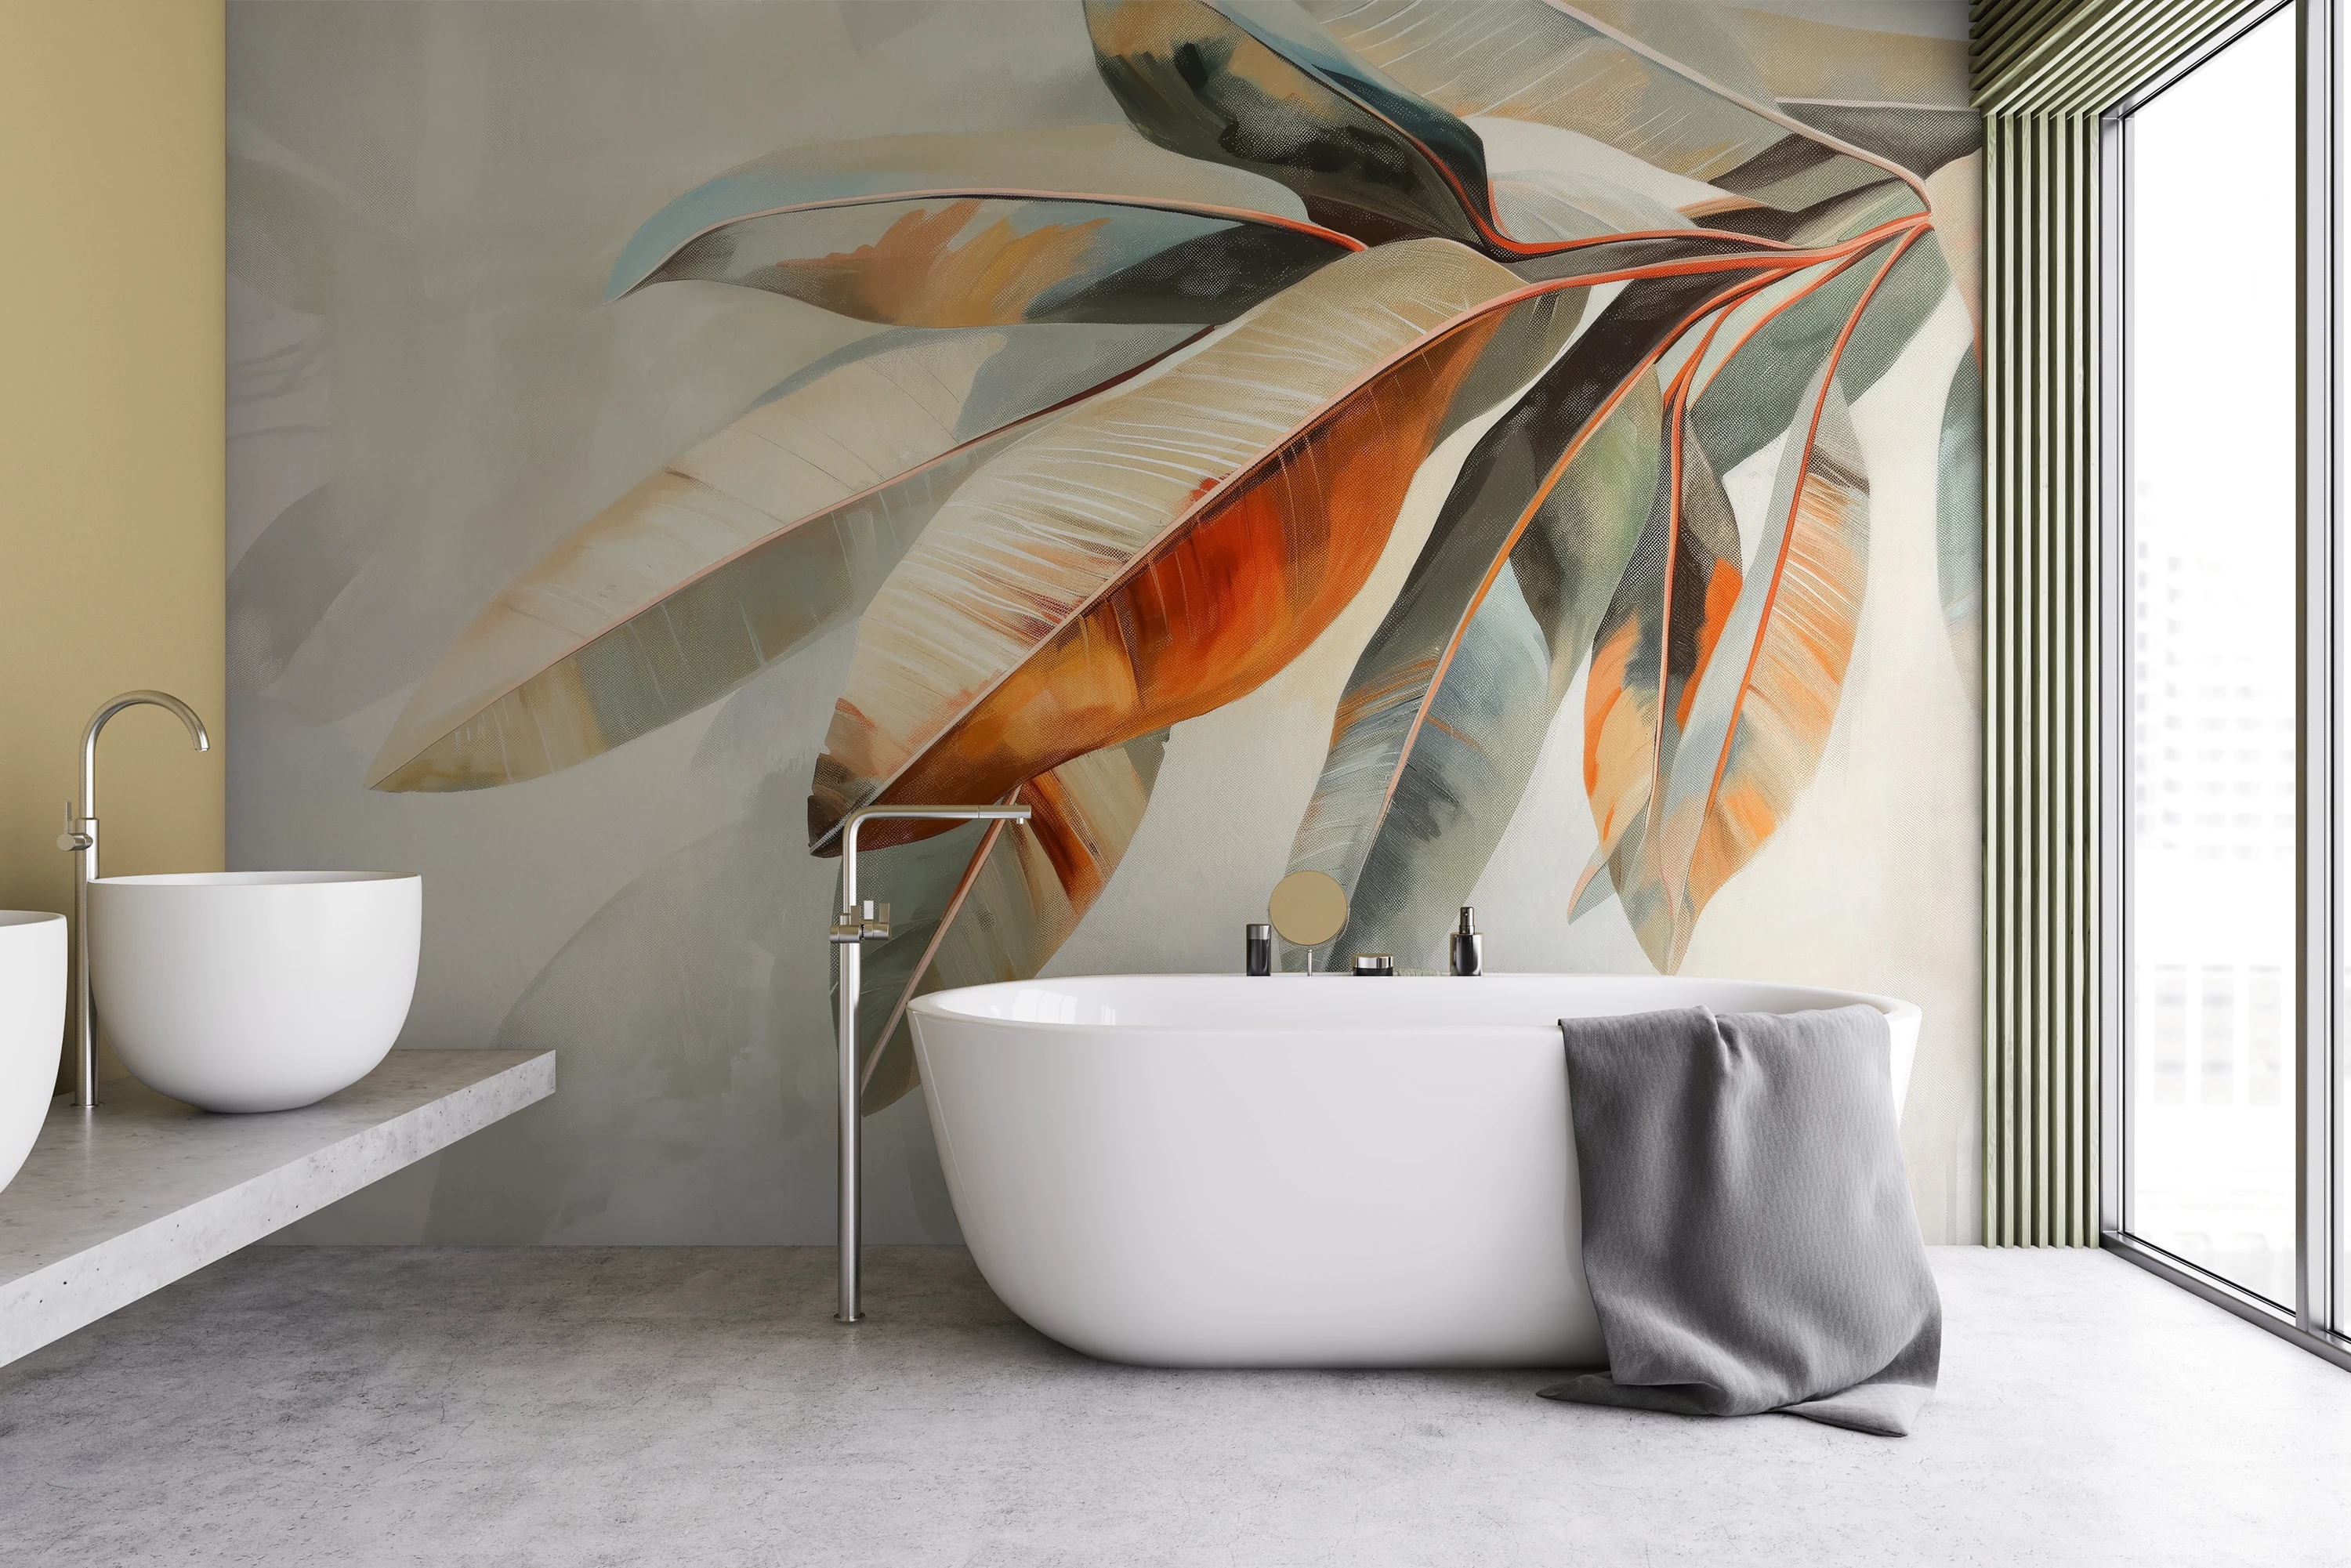 Photo wallpaper with tropical leaves on the wall